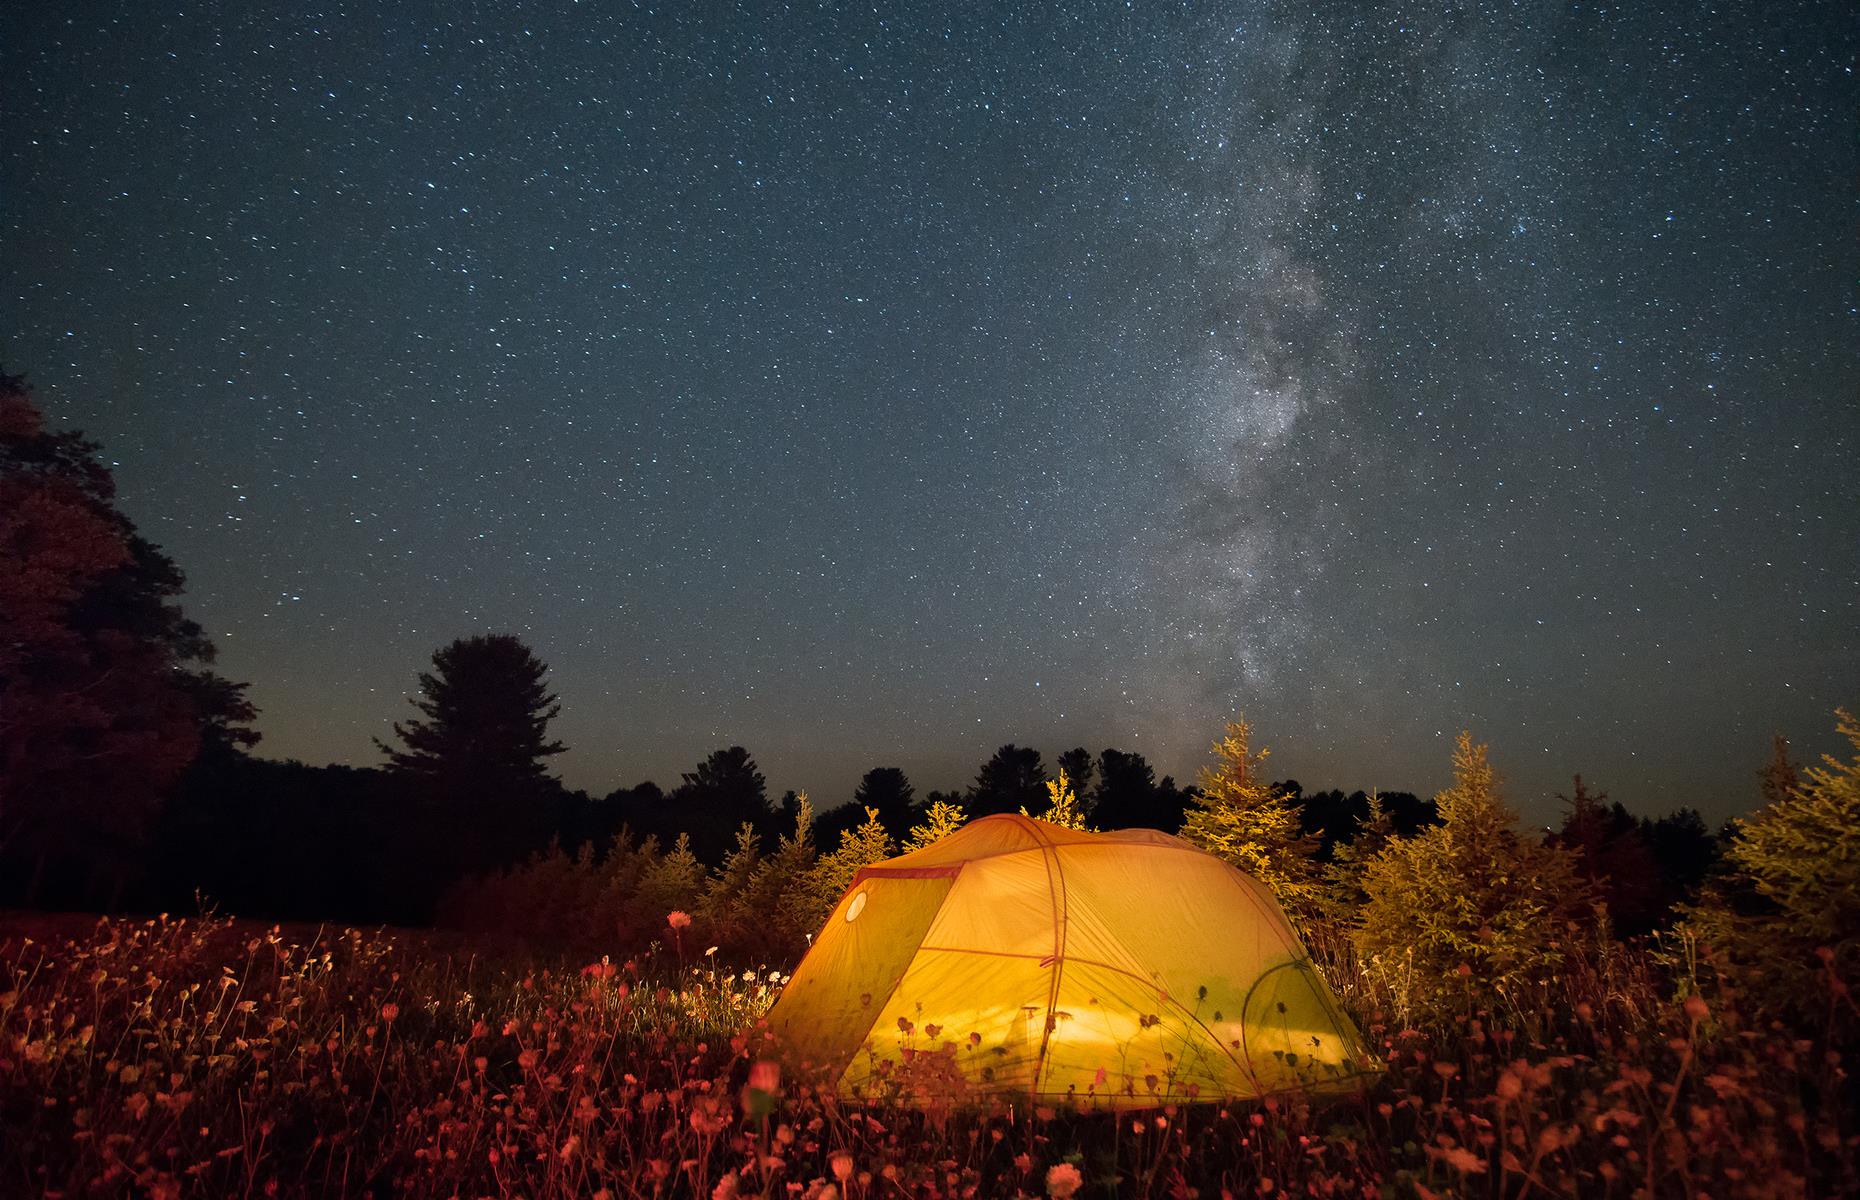 <p>The only International Dark Sky Place in the state of Pennsylvania, Cherry Springs State Park boasts prime stargazing conditions 60–85 nights of the year. <a href="https://cherryspringsstatepark.com/lodging/">Optimally located cabins</a> allow star-lovers to overnight nearby and <a href="https://cherryspringsstatepark.com/private-guided-star-tours/">private guides</a> also operate around the park – check with individual tour operators for updates and availability. <a href="https://www.loveexploring.com/galleries/97747/the-most-unique-place-to-camp-in-every-state?page=1">Now discover the most unique place to camp in every state</a>.</p>